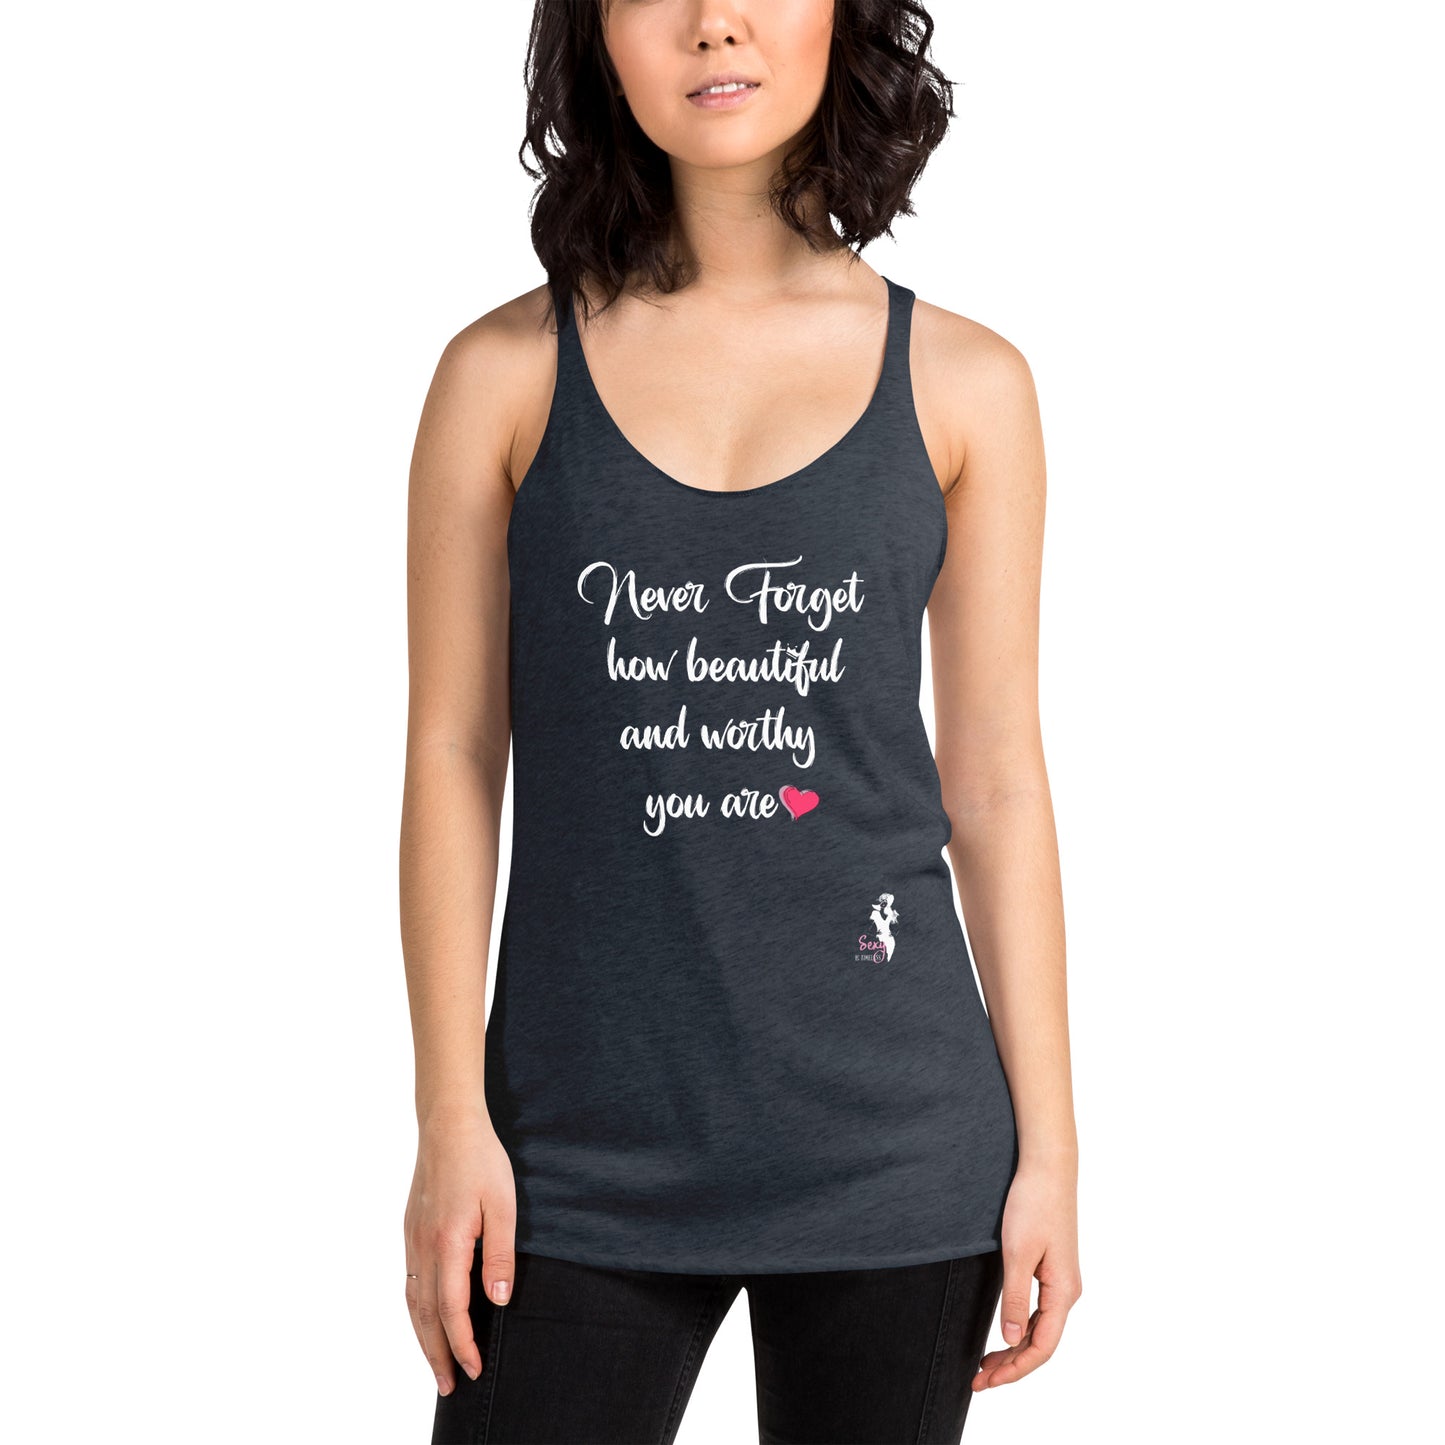 Women's Racerback Tank - Never forget - Different colors